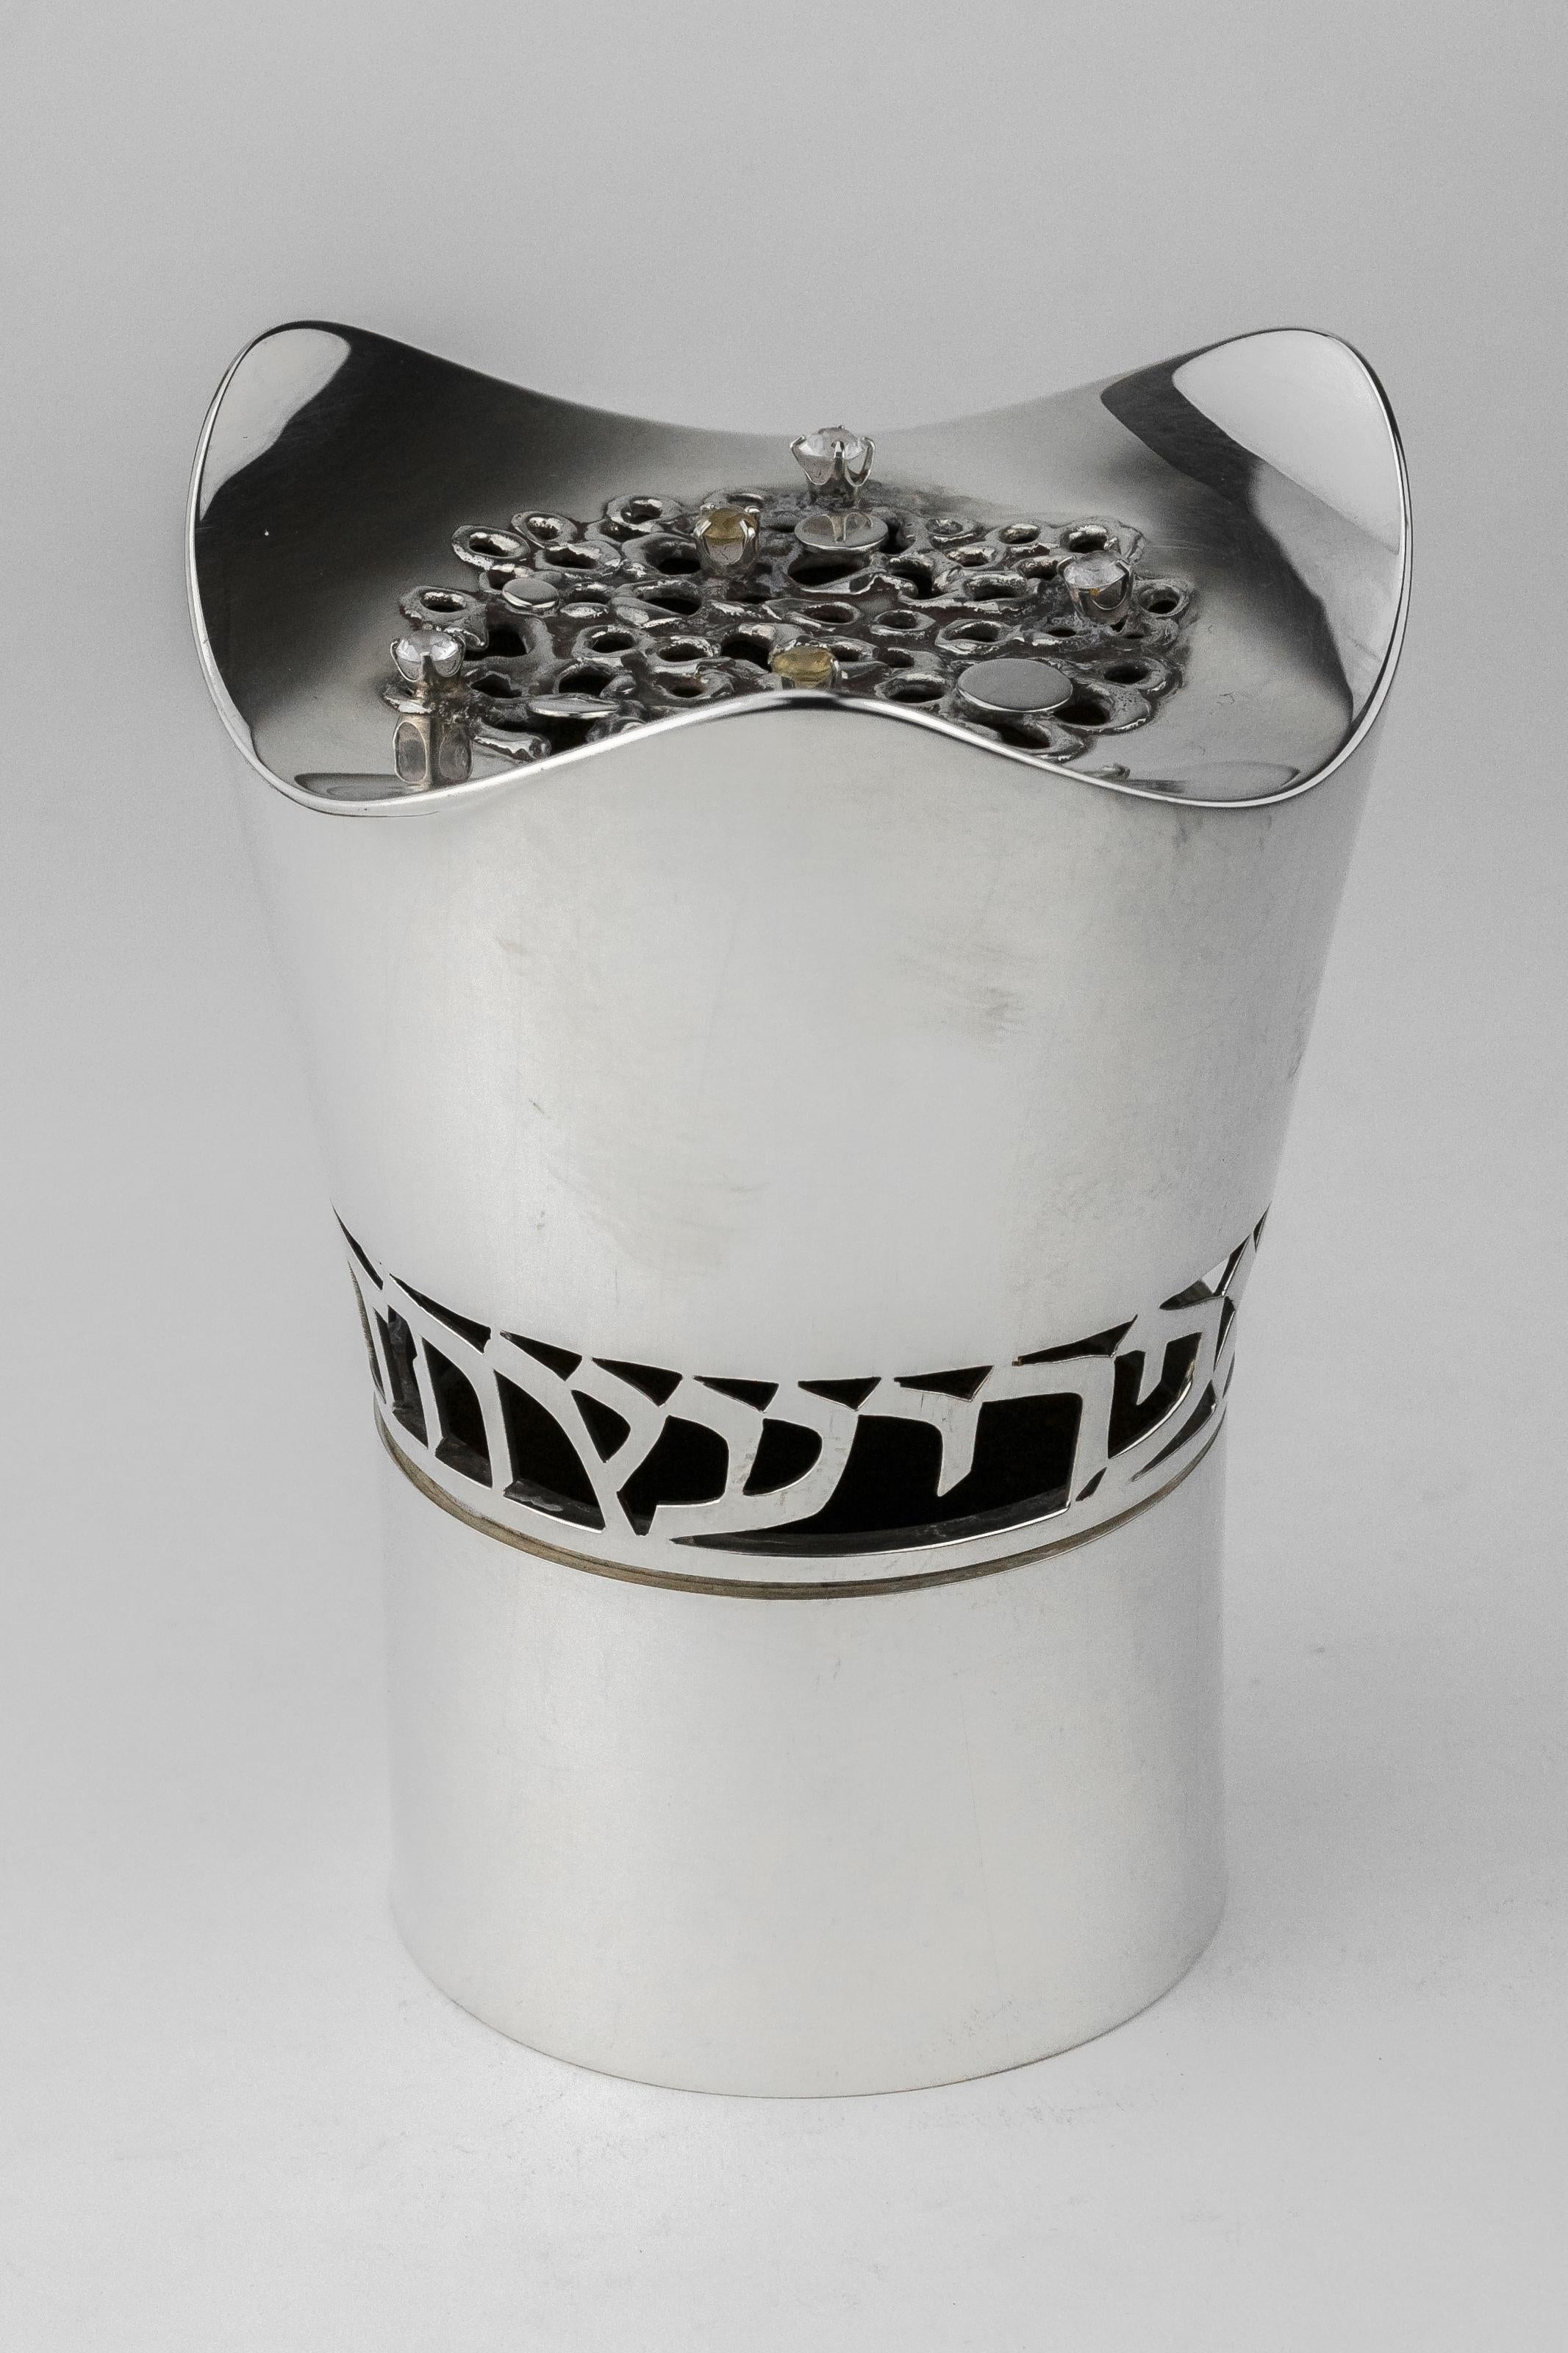 American sterling silver Etrog container, Moshe Zabari, New York, 1970.
Cylindrical shape flaring to three graceful arcs at top surrounding pierced center with semi-precious stones and with pierced Hebrew letters around cylinder which read: 